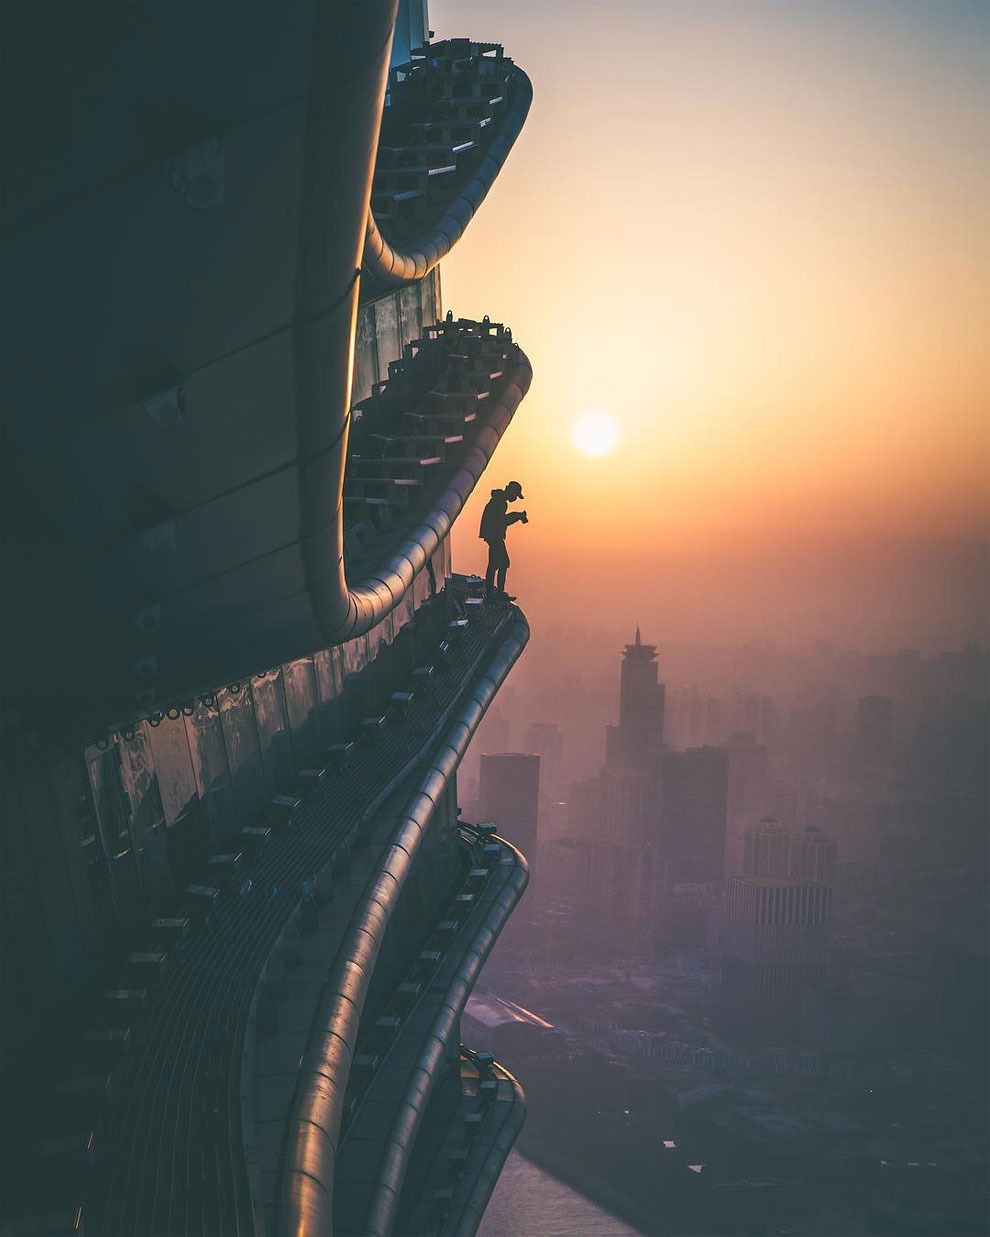 Breathtaking Rooftop Shots From Skyscrapers Of Shanghai By Oliver Shou – Design You Trust